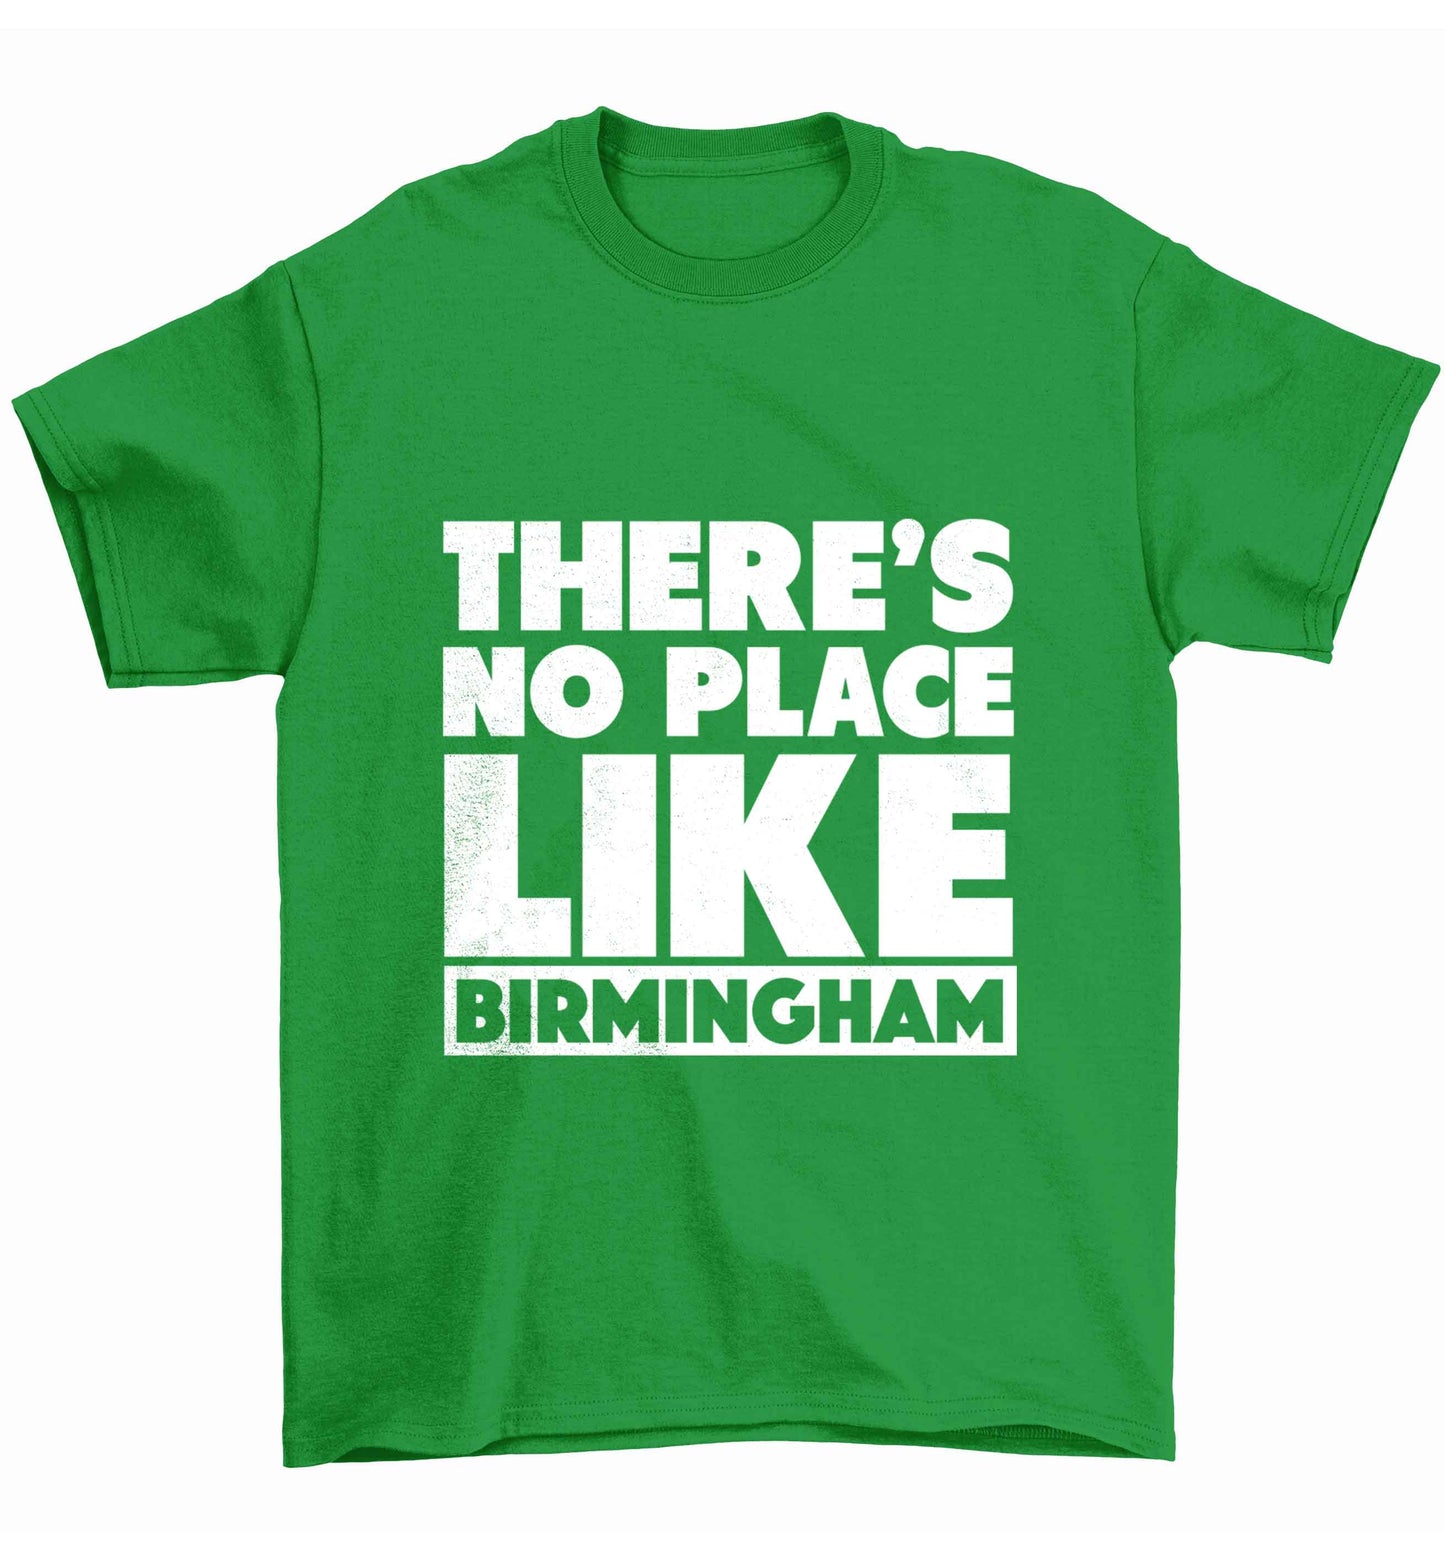 There's no place like Birmingham Children's green Tshirt 12-13 Years